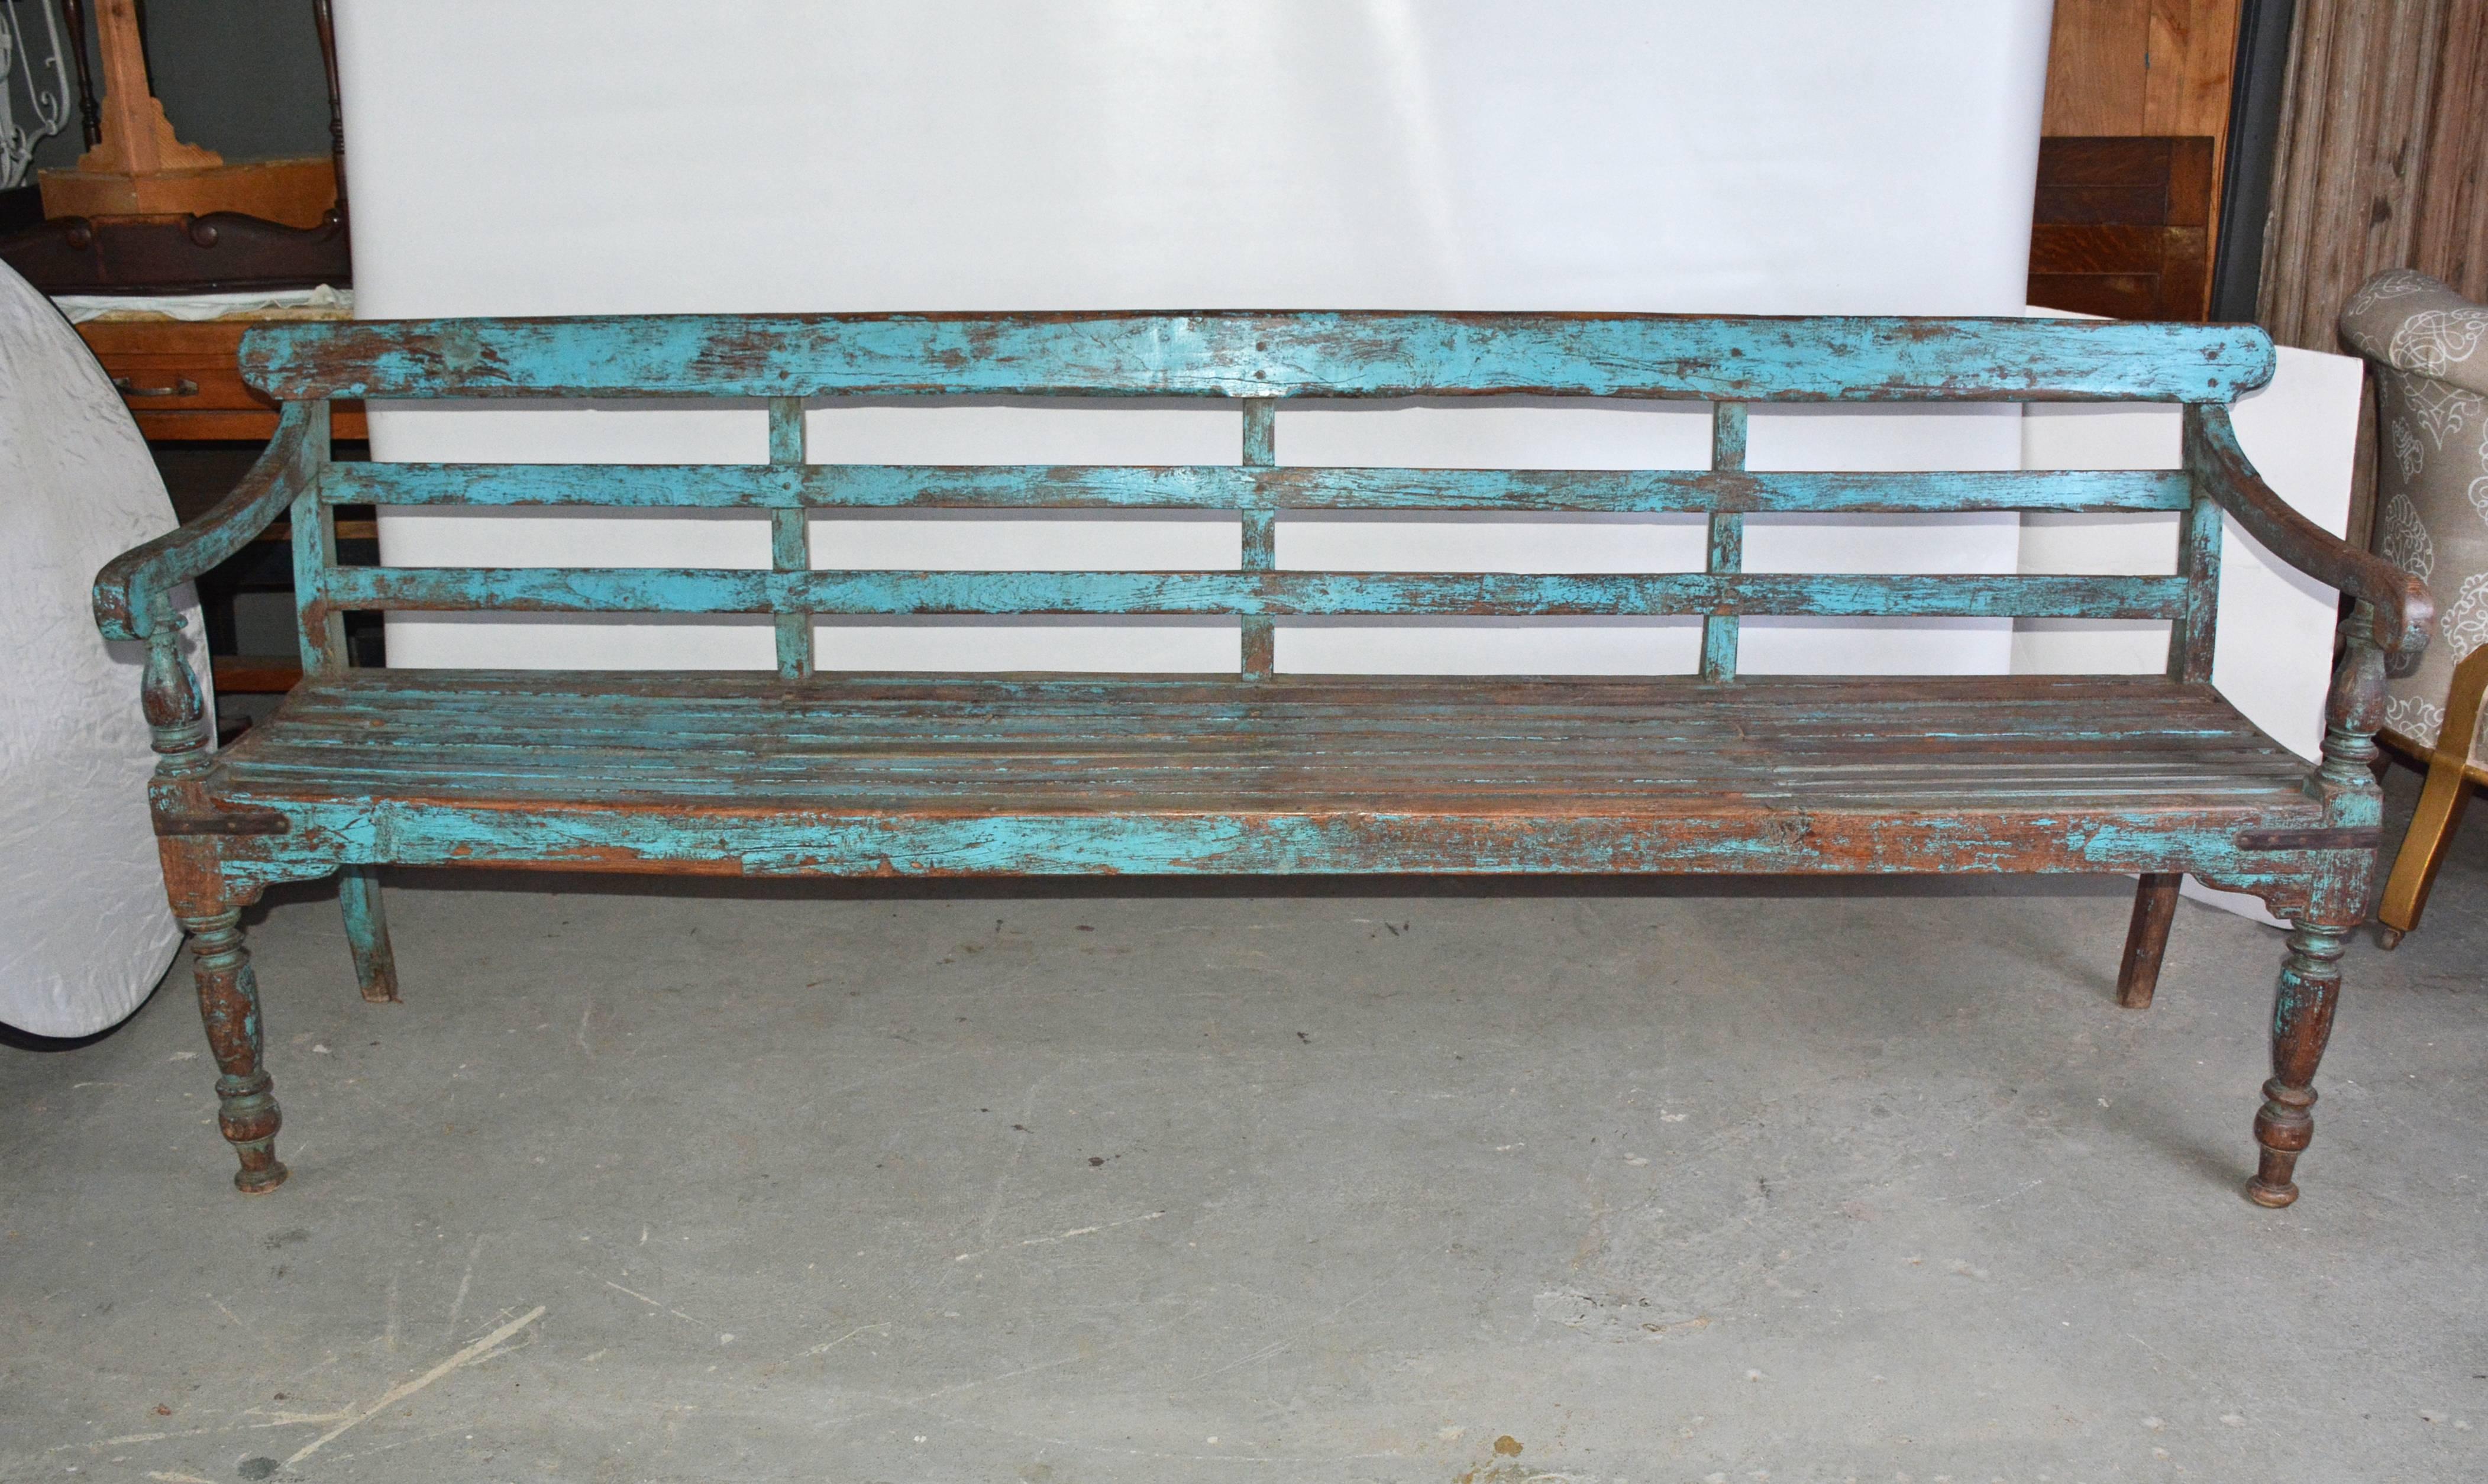 The antique blue-painted English Colonial style wood bench has slatted back and concave seat. Metal L-shaped straps secure all four corners. The front legs and arm supports are turned.
Measures: Arm height: 28".